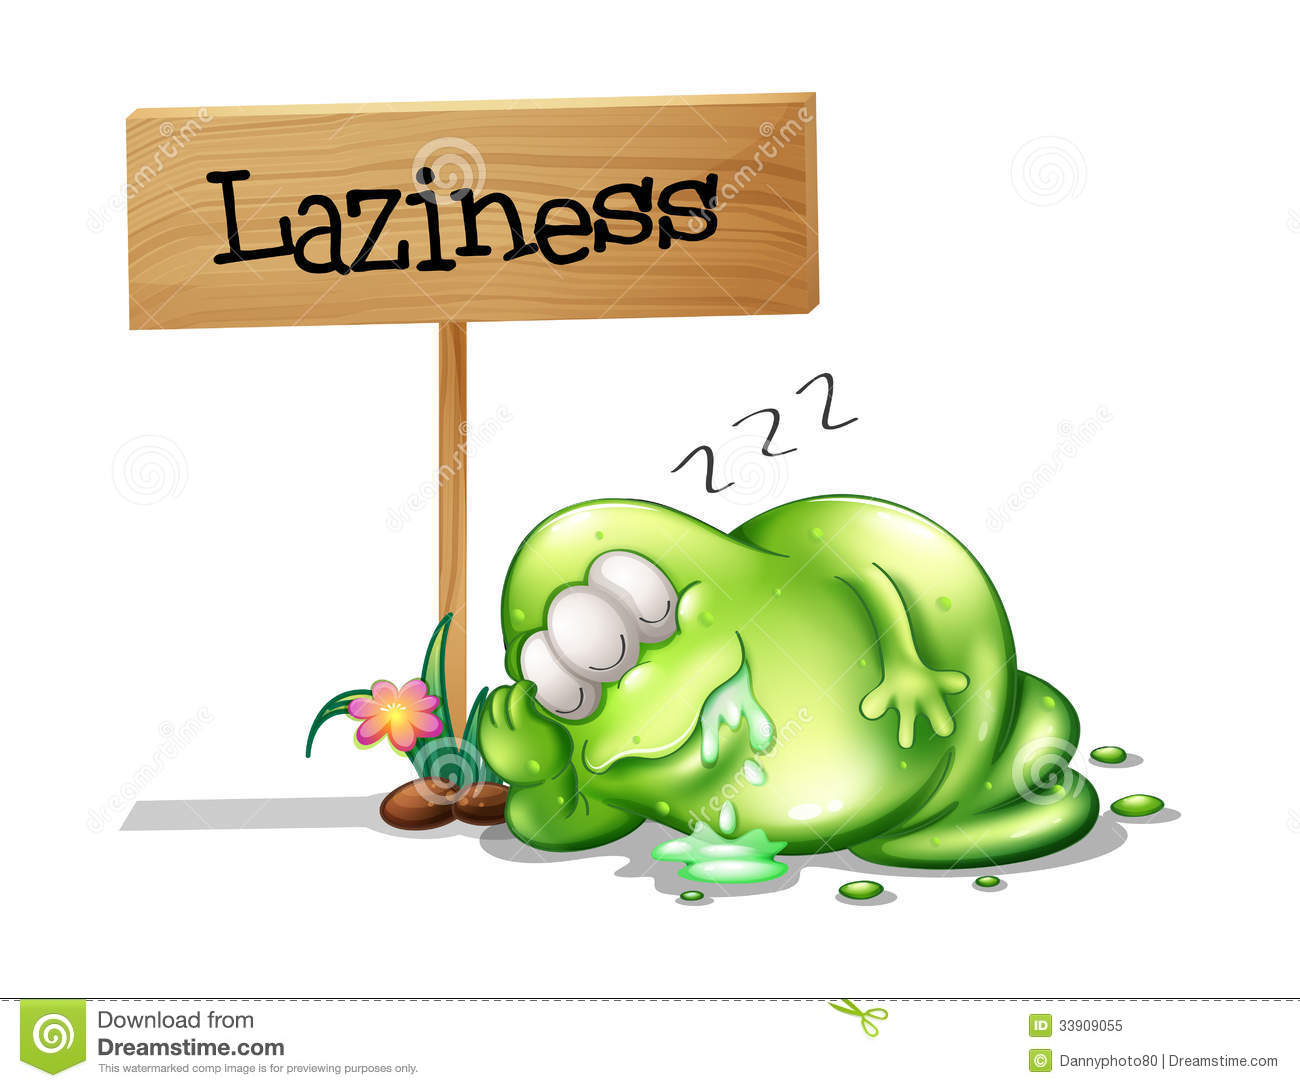 Free Stock Photo  A Lazy Monster Sleeping Near The Wooden Signboard